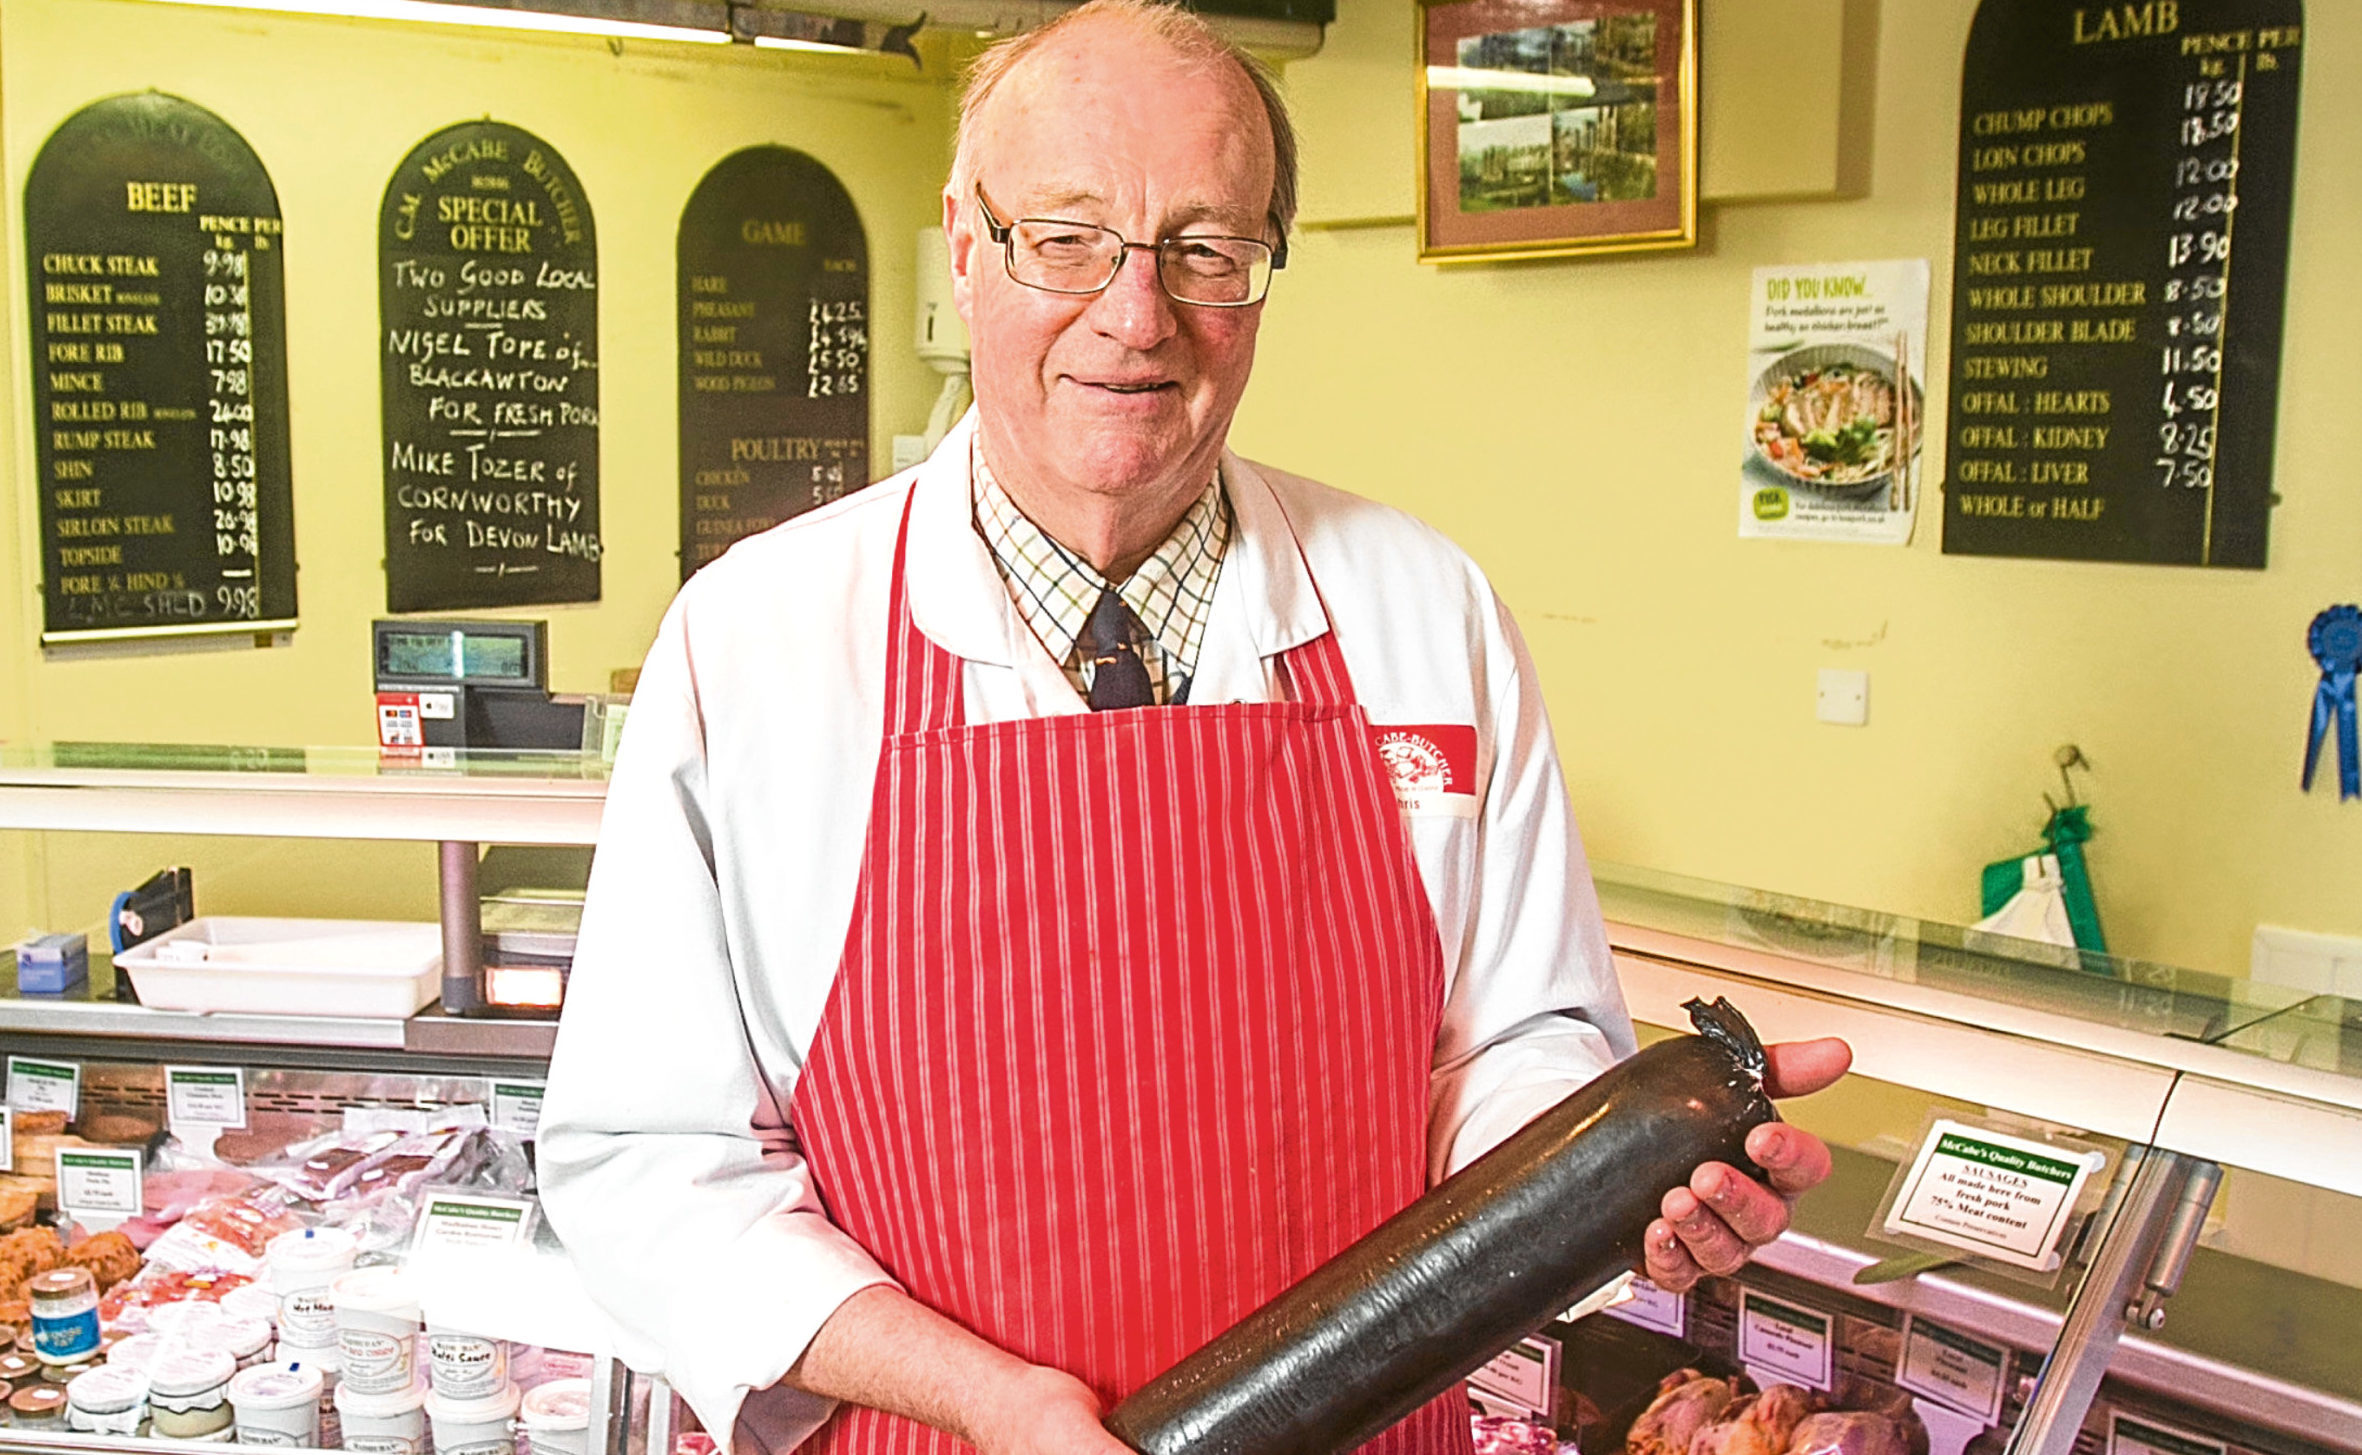 Christopher McGabe at his butchers shop in Totnes, Devon. (SWNS)